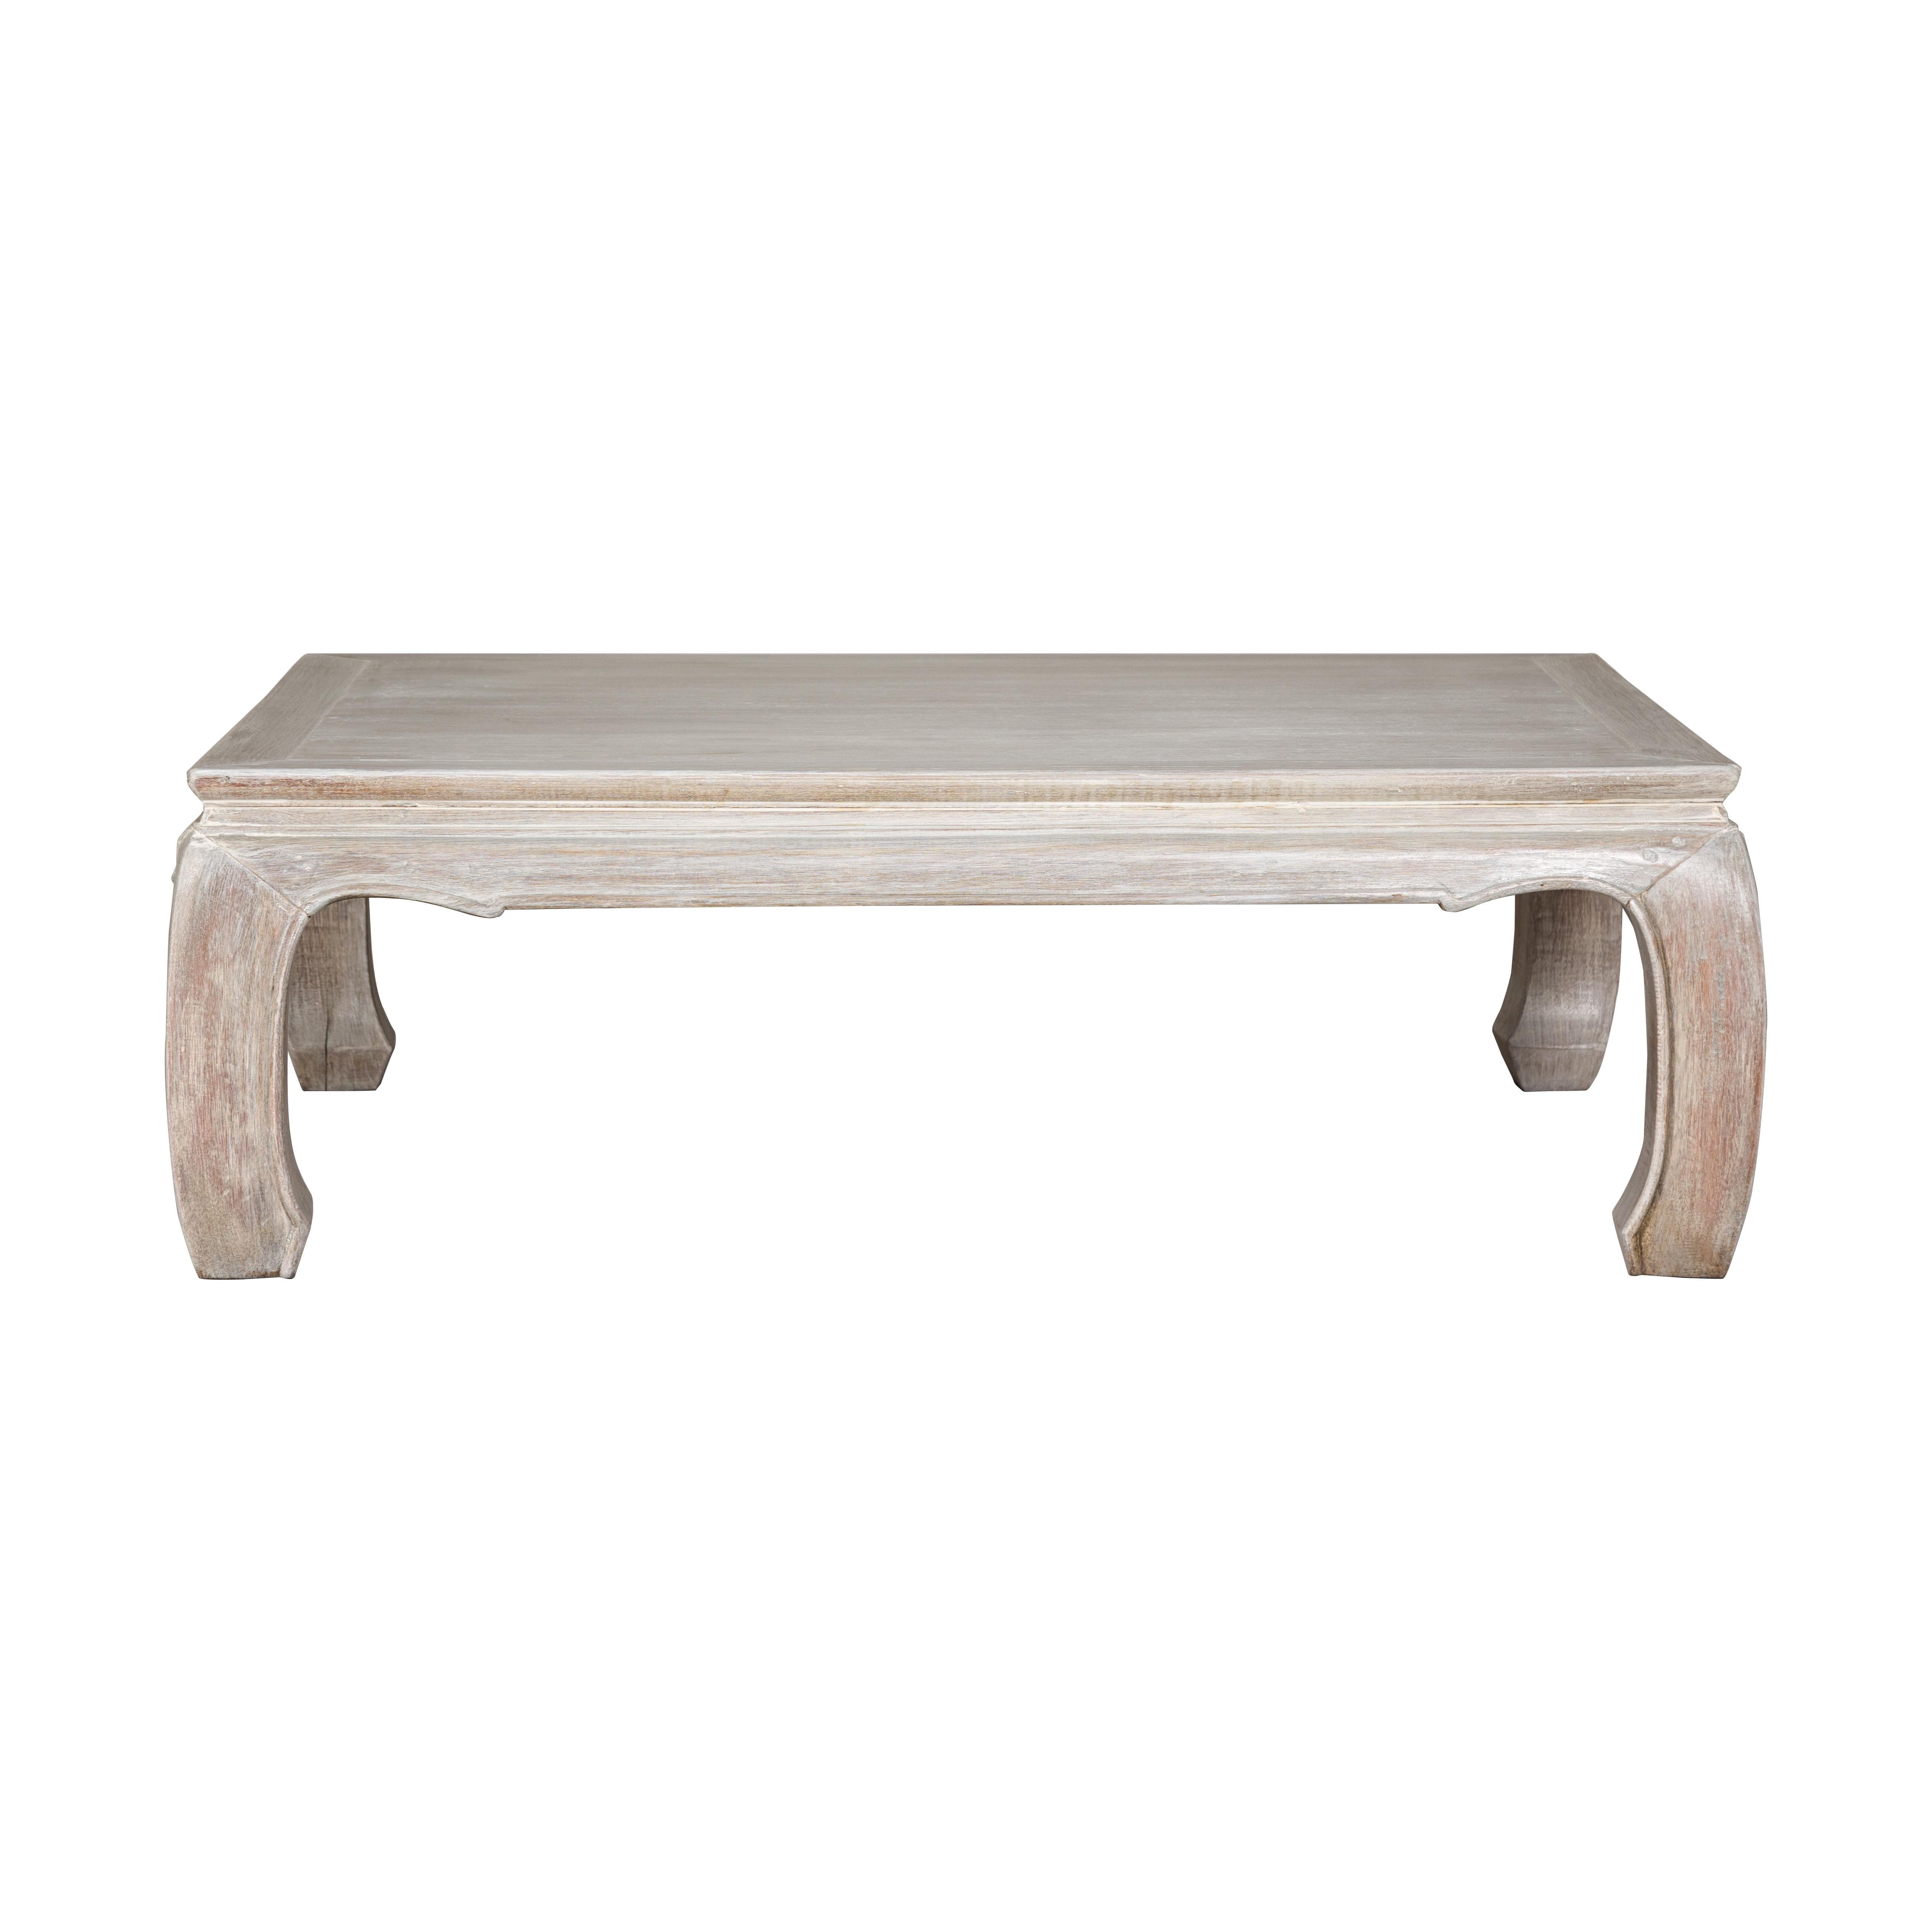 Teak Ming Style Whitewash Coffee Table with Chow Legs and Carved Apron For Sale 10